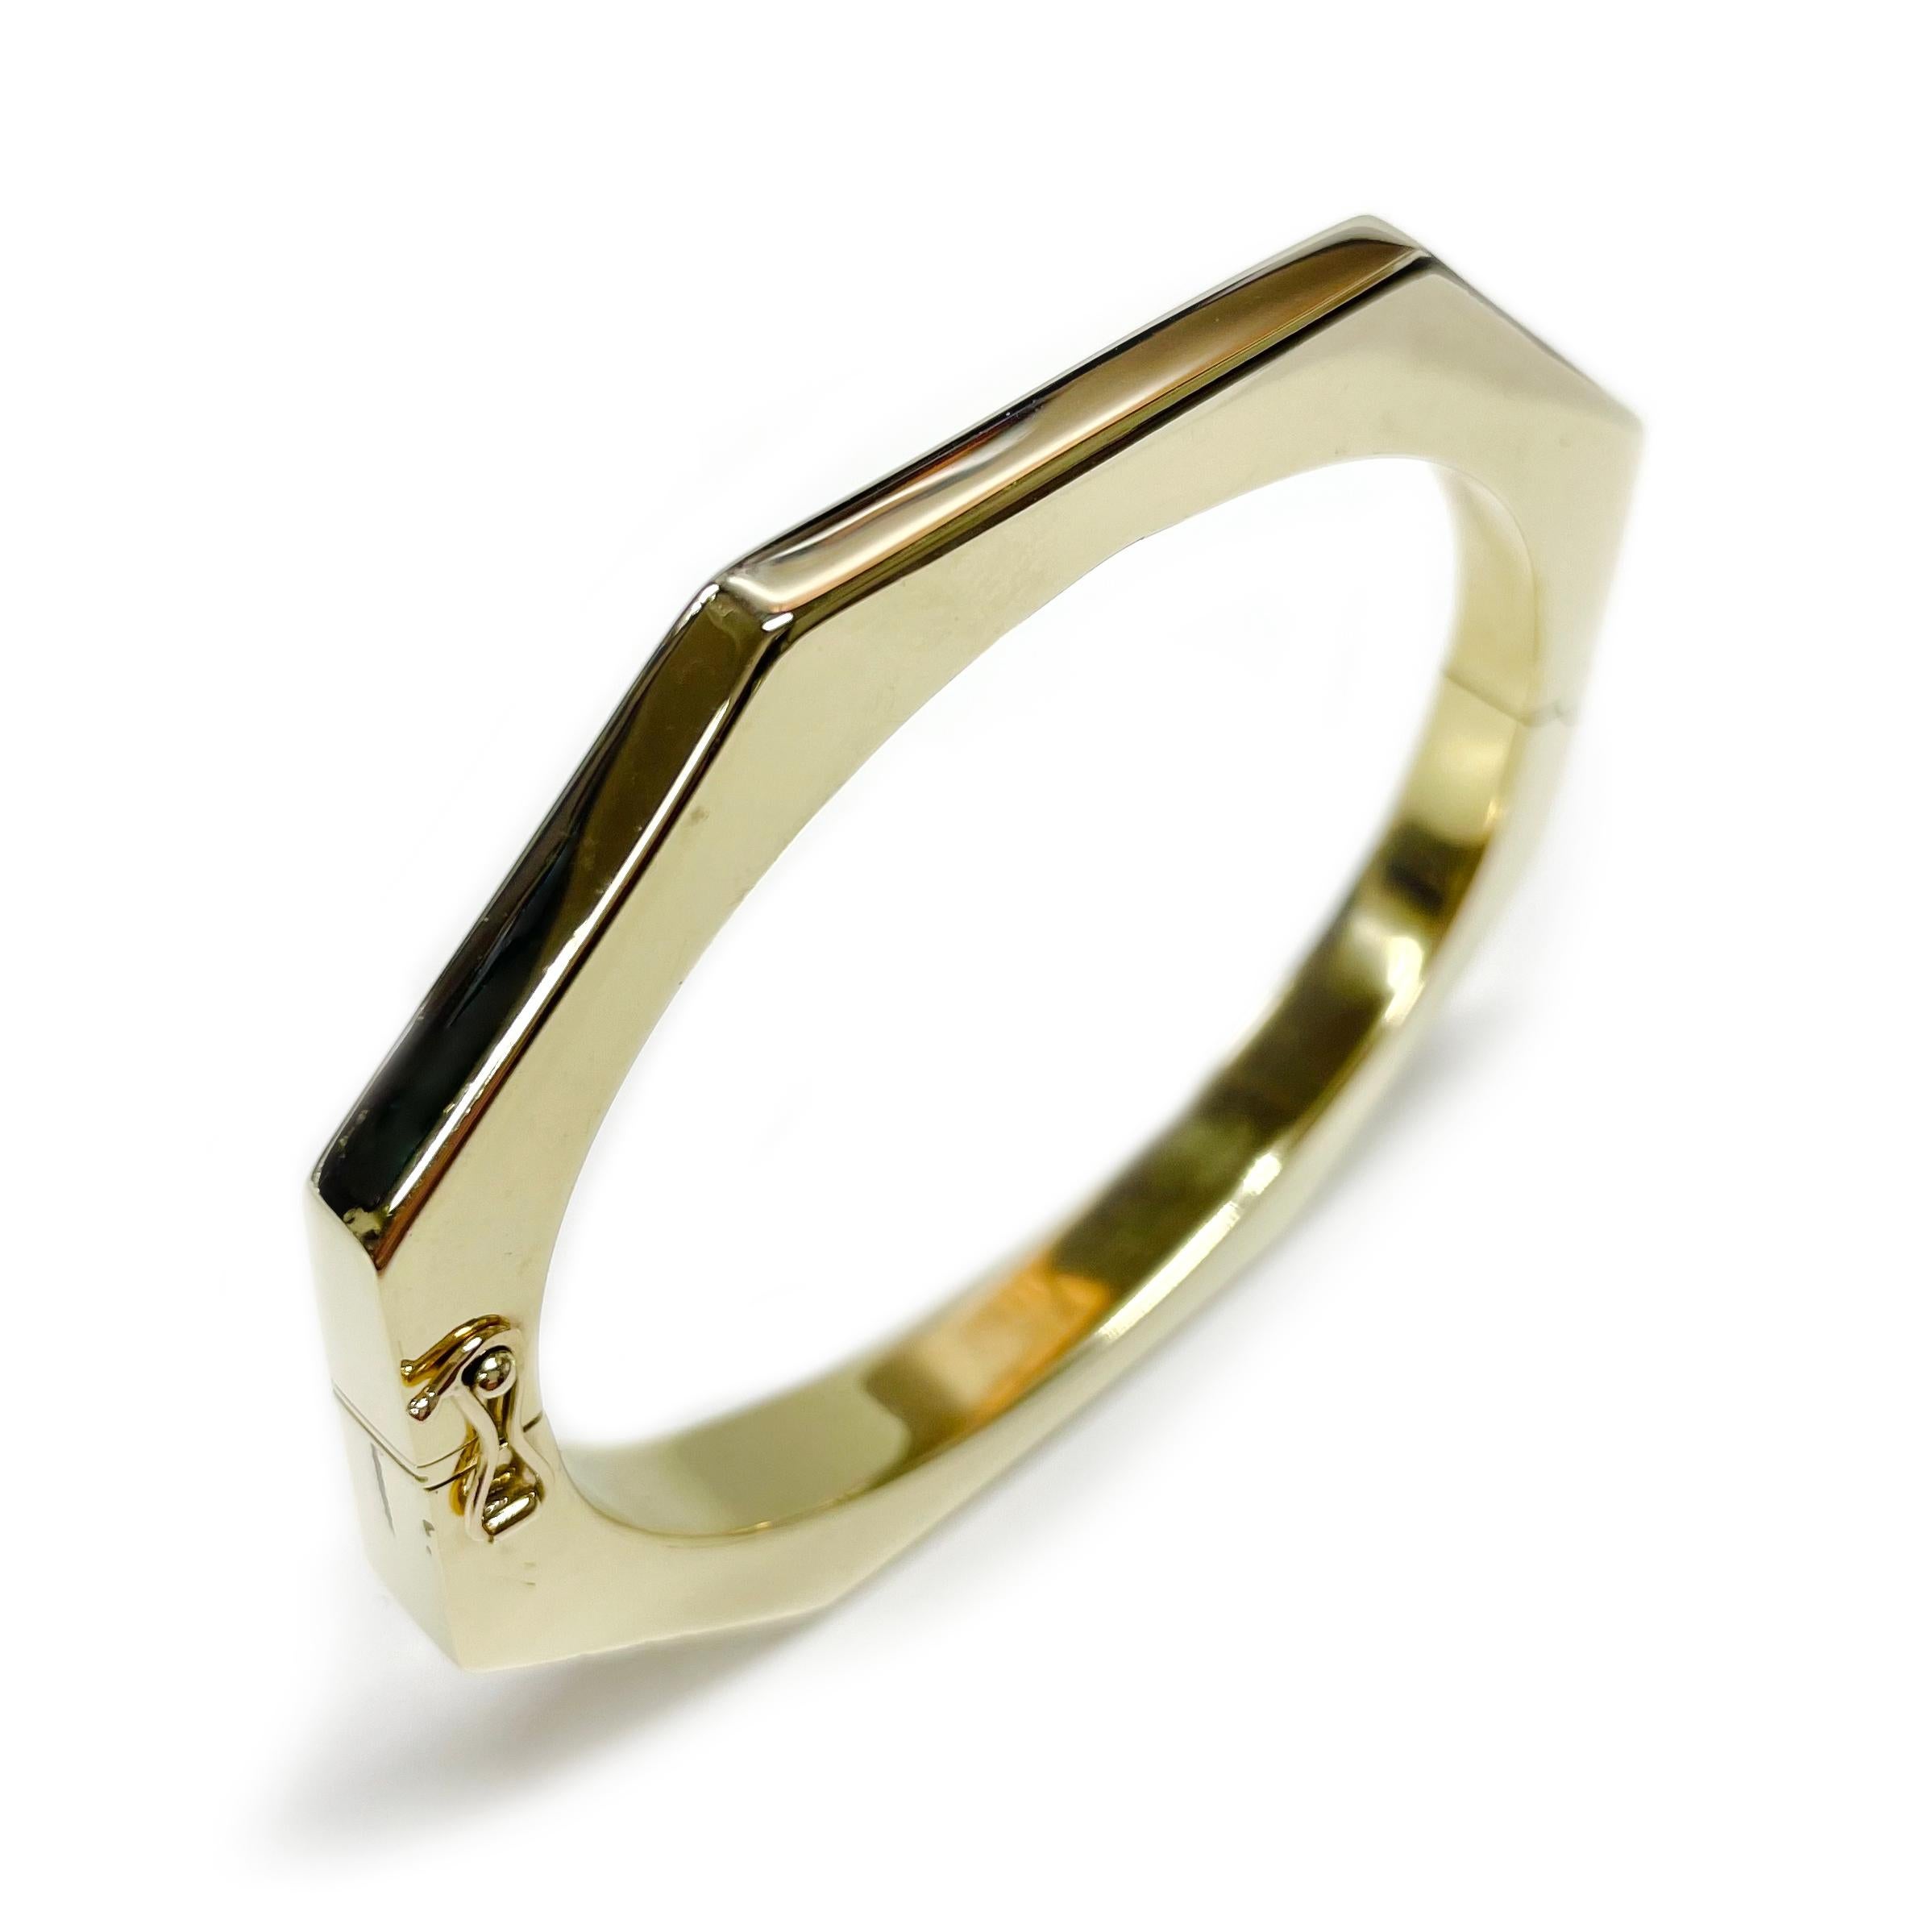 14 Karat Octagon Hinged Bangle Bracelet. The bangle bracelet is eight-sided with high-polish and box closure with safety-eight. The bracelet measures 69.90 x 60.90 x 7.8mm and tapers in width from the front of the bangle to the back from 7.8 to